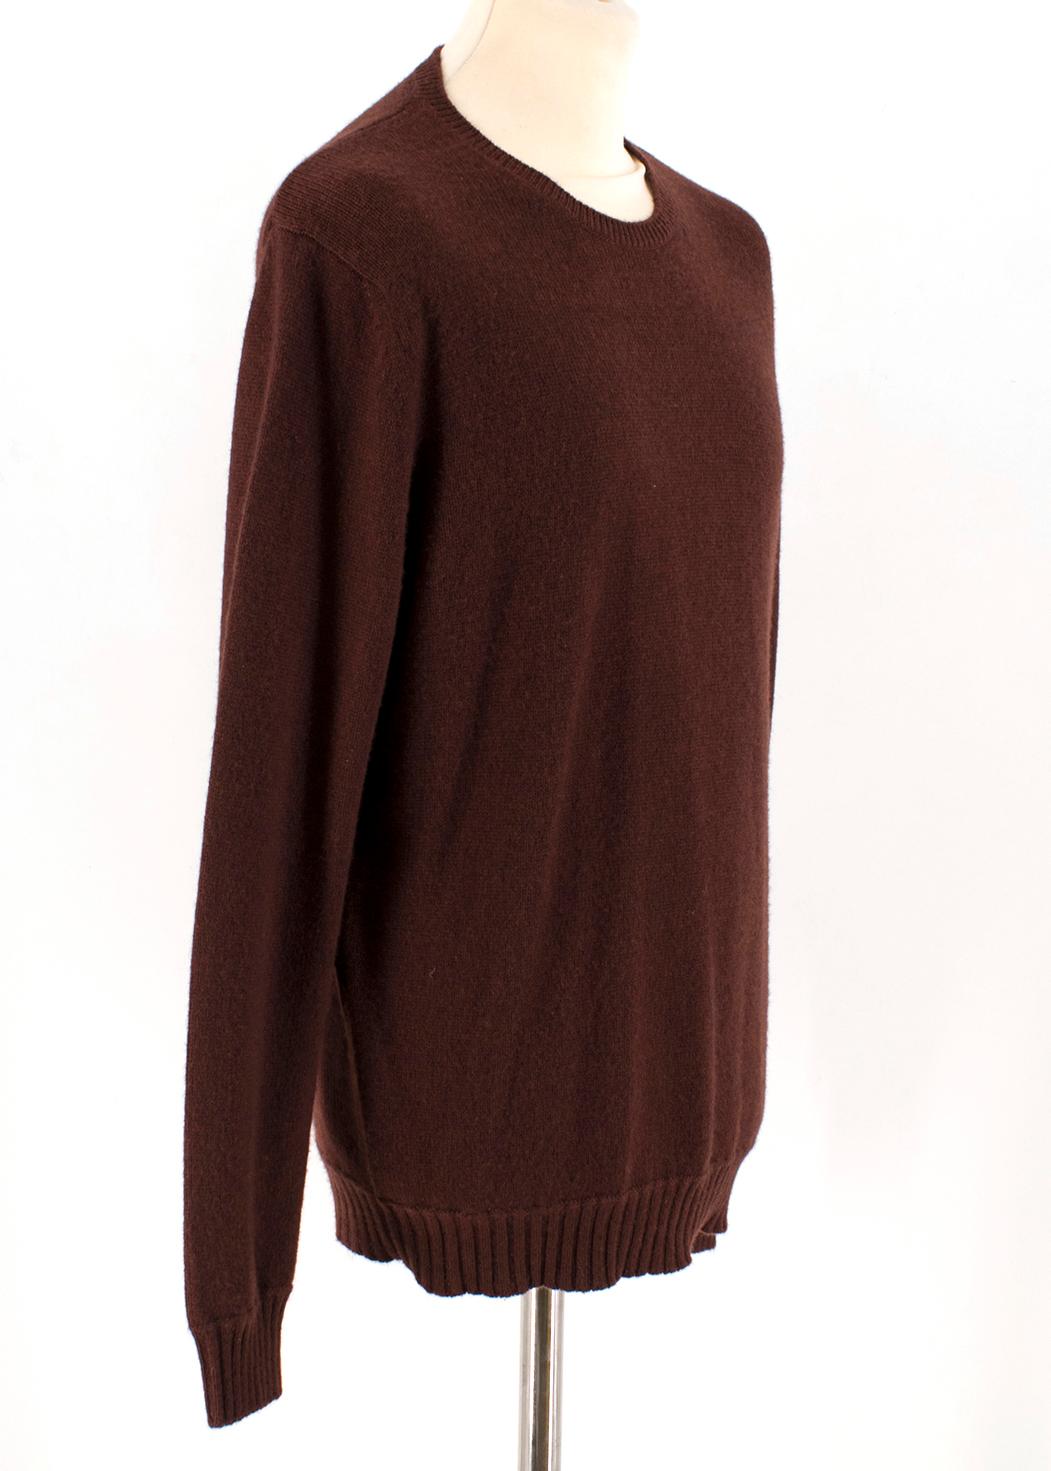 Ermenegildo Zegna Cashmere Maroon Jumper

- Finely made cashmere maroon jumper 
- Material built for warmth 
- Sophisticated look with patterned stitched cuffs and collar
- Made from complete cashmere
- Stretchable fabric allows easy fit

Please